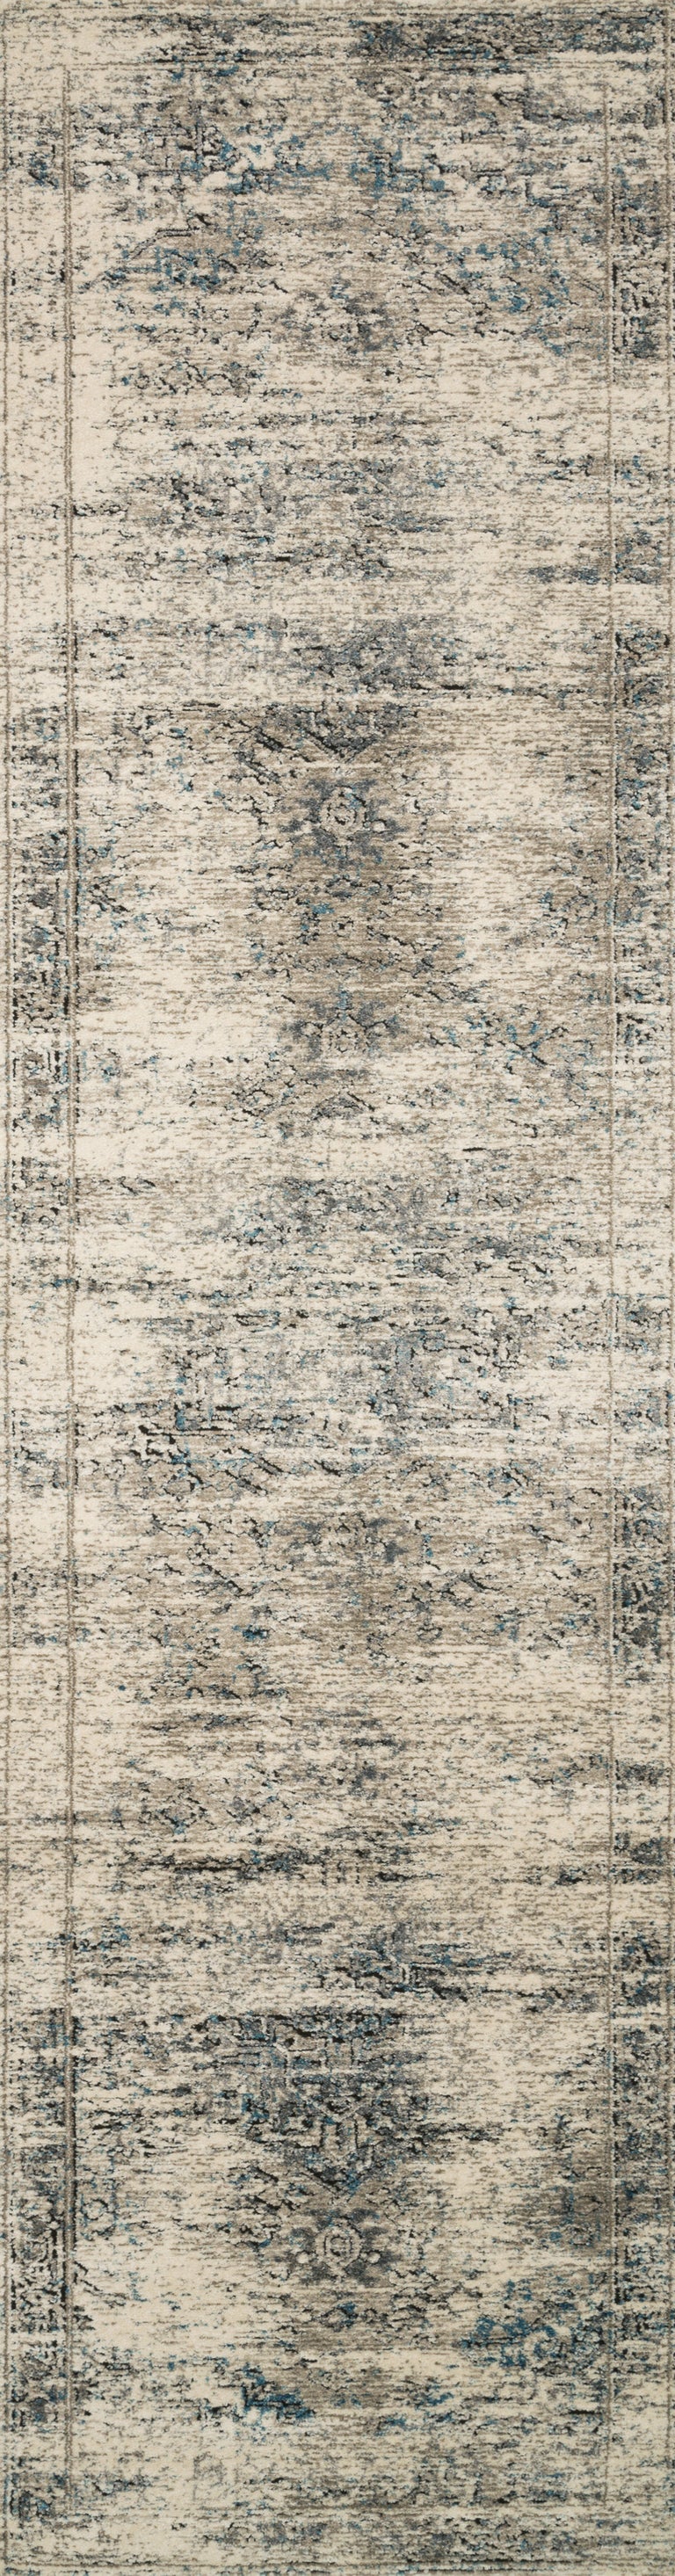 Loloi Rugs Millennium Collection Rug in Taupe, Ivory - 9'6" x 13'